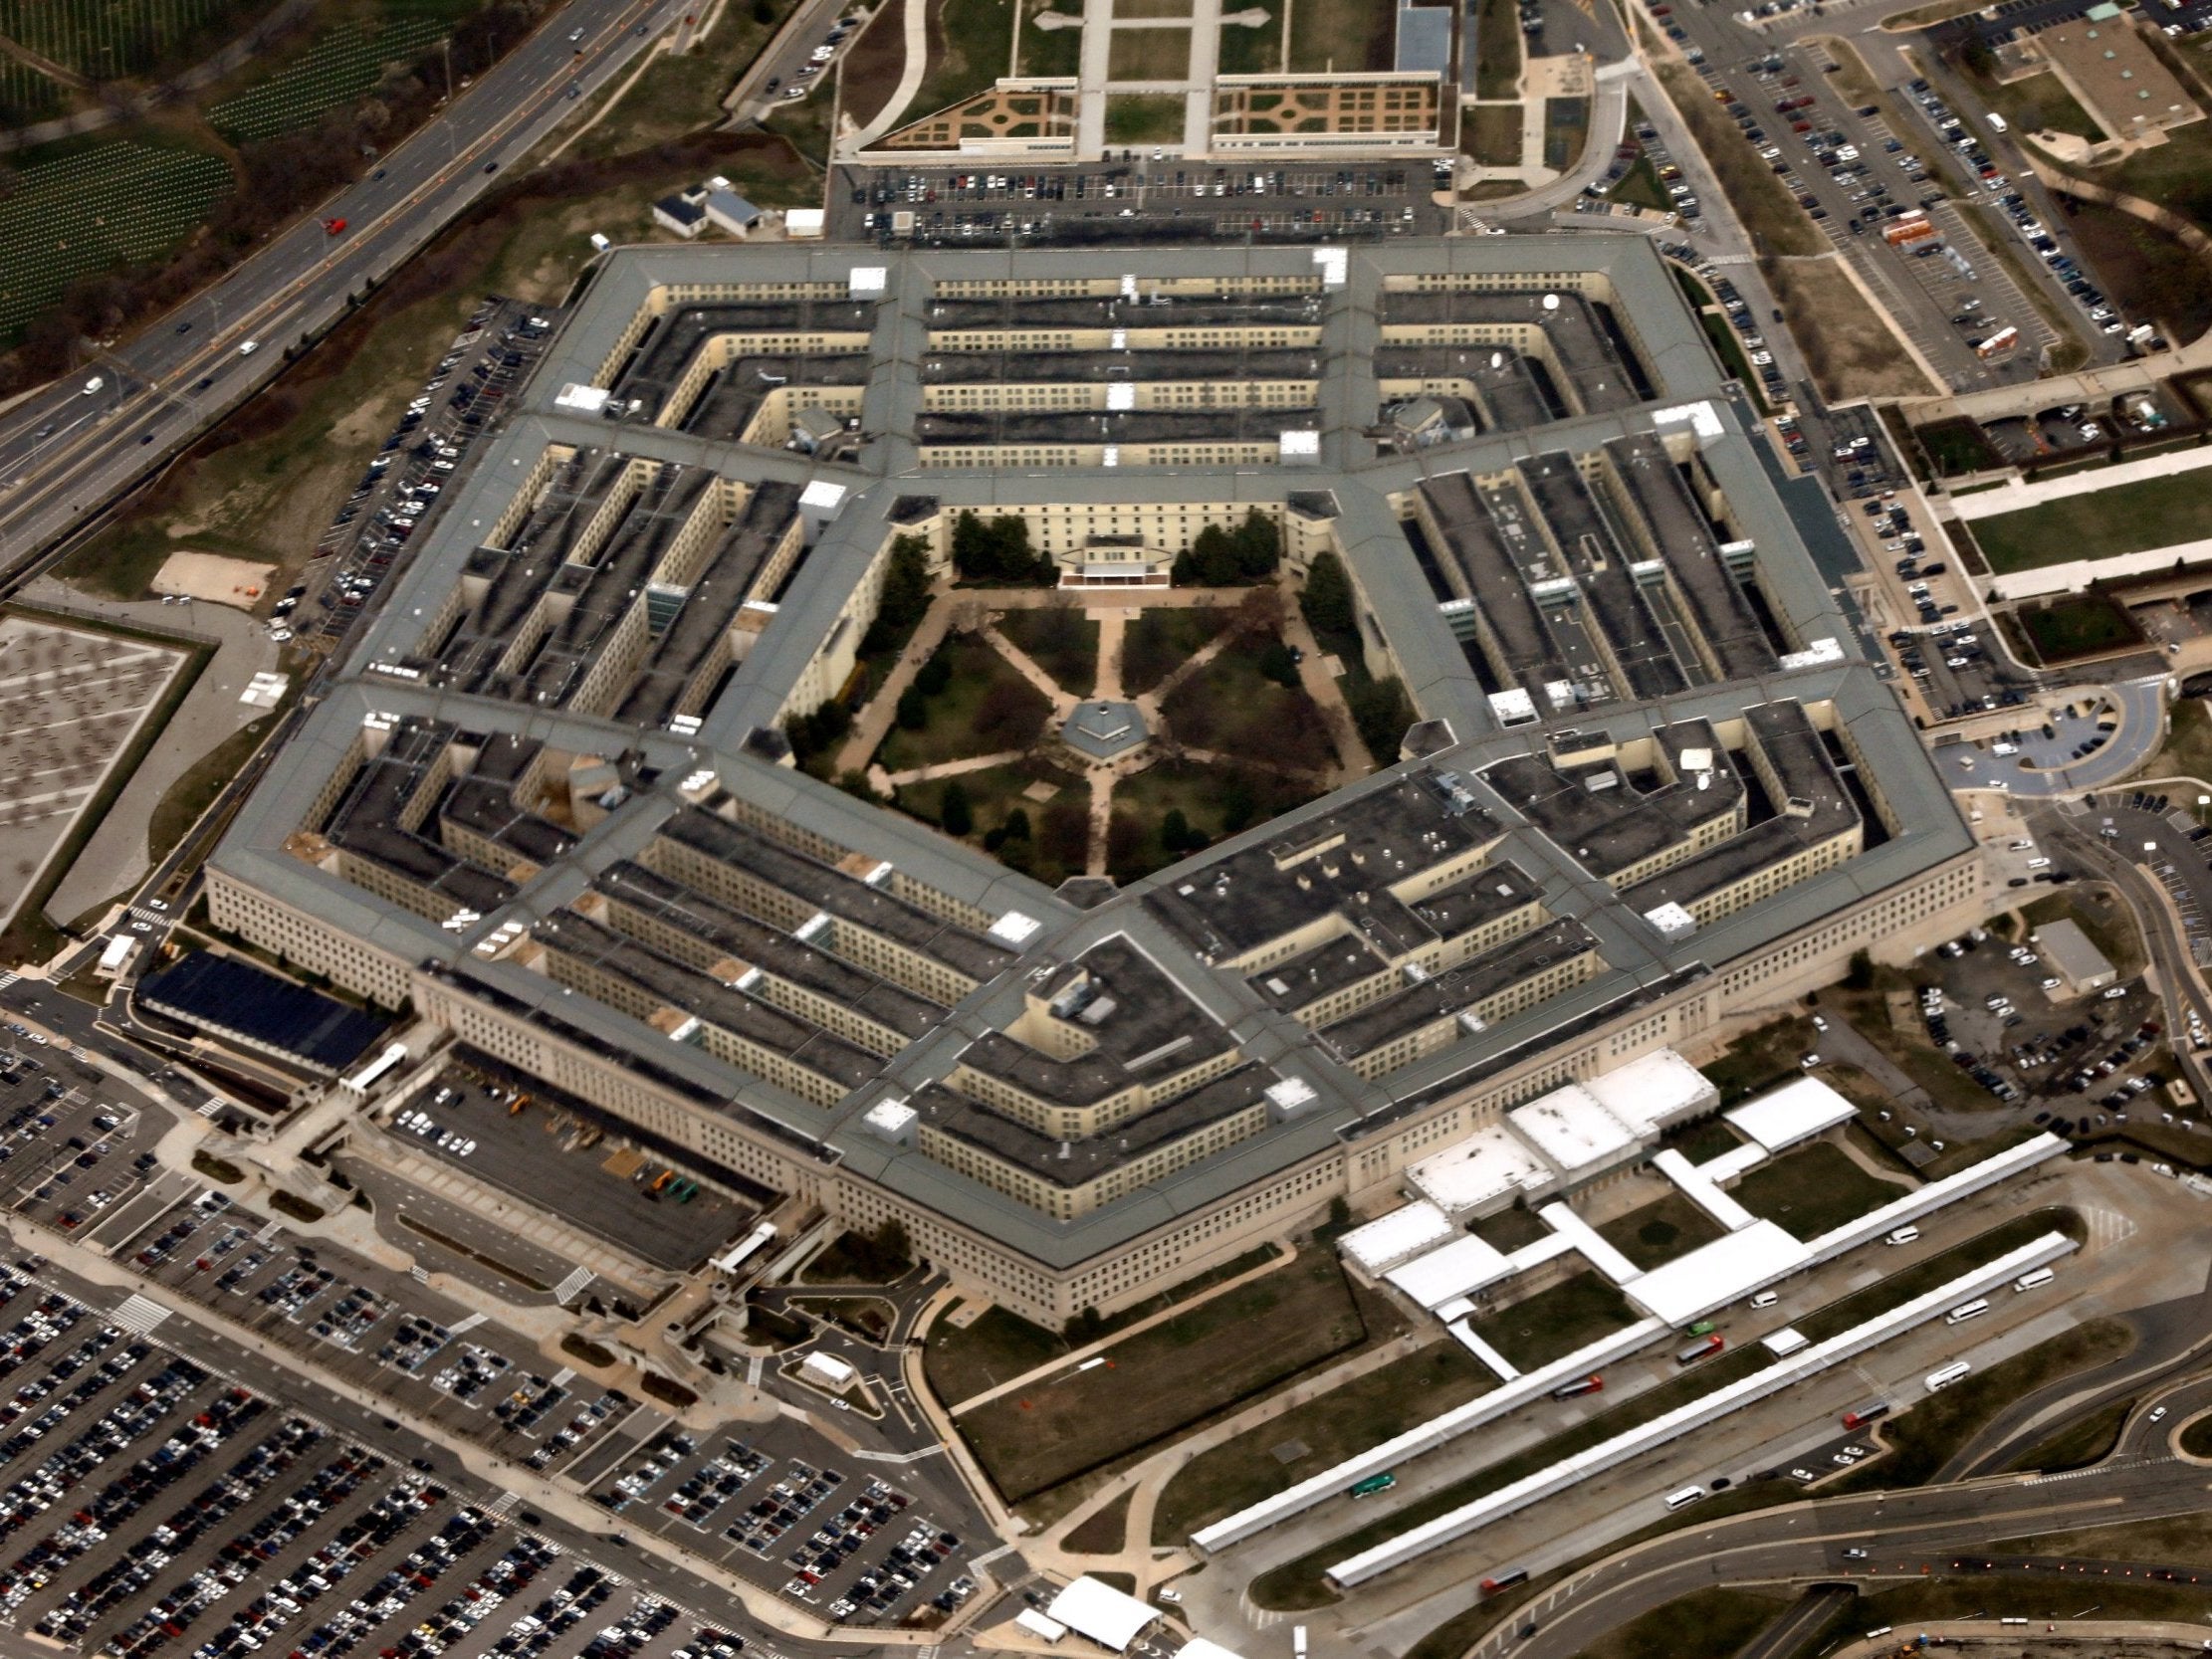 Two of the four suspicious packages were intercepted before being brought into the Pentagon